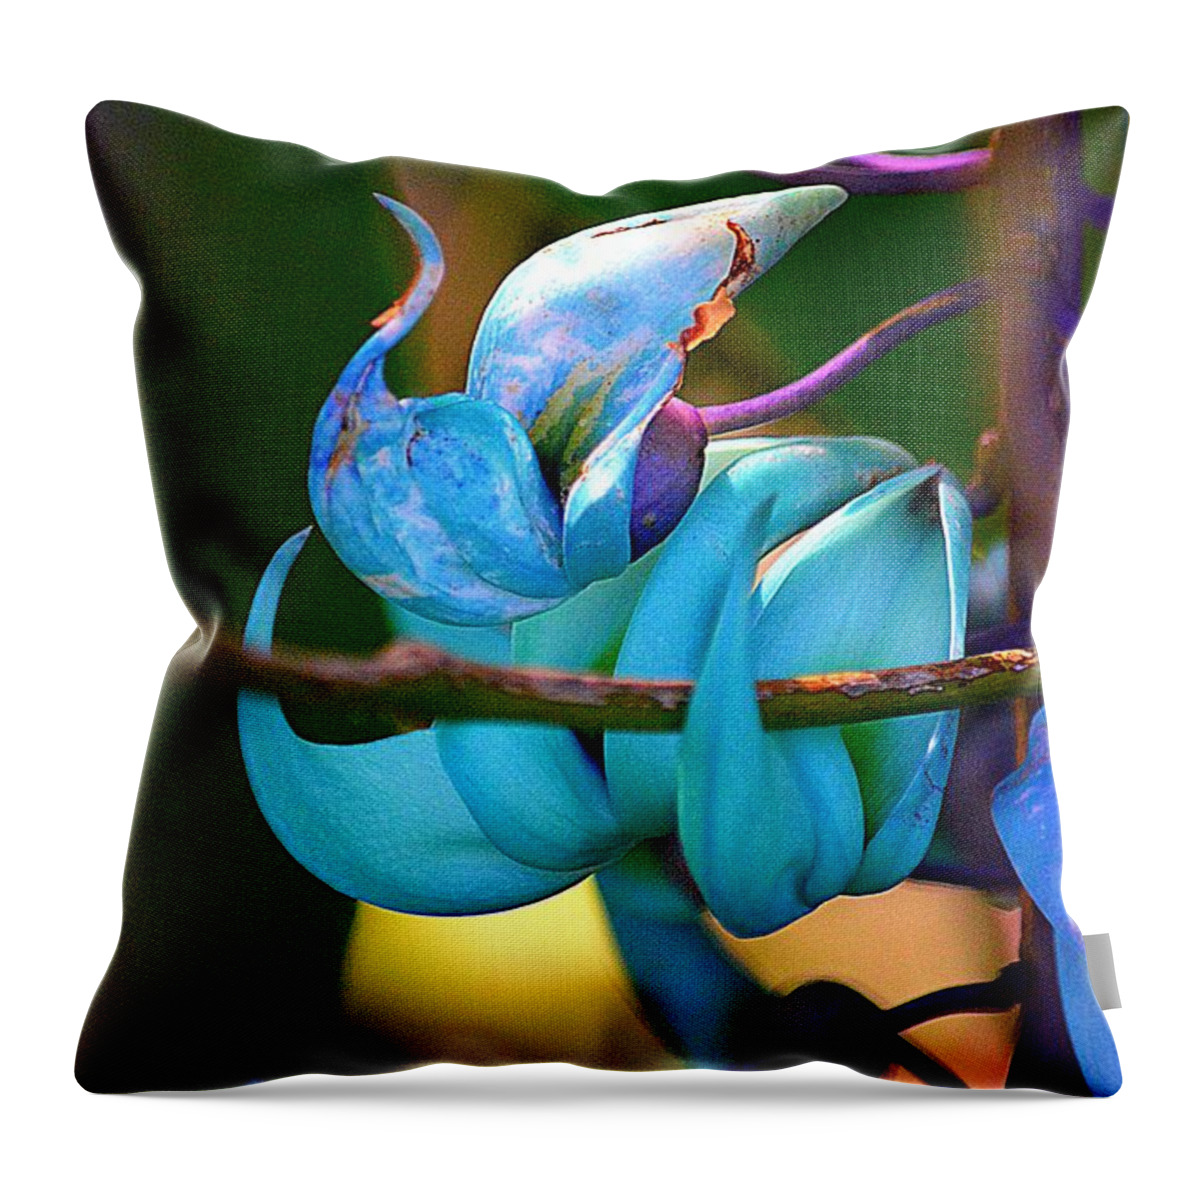 Flower Throw Pillow featuring the photograph Colorful Jade Blossom by Lori Seaman